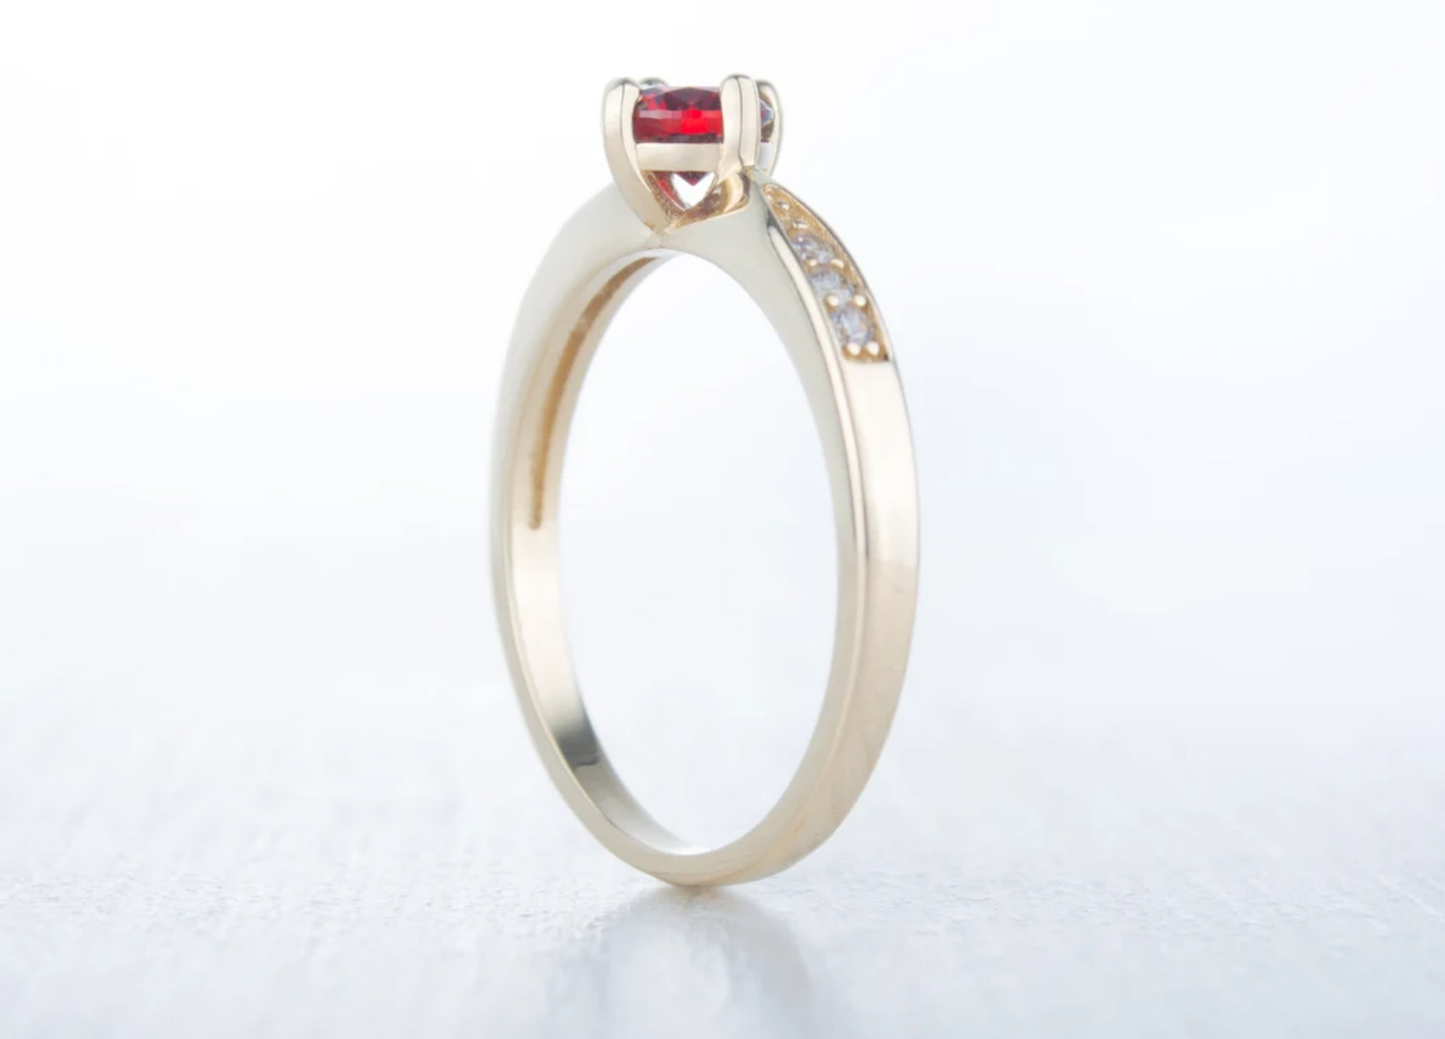 Size UK O / US 7 10K Solid Yellow Gold and Garnet Engagement ring.